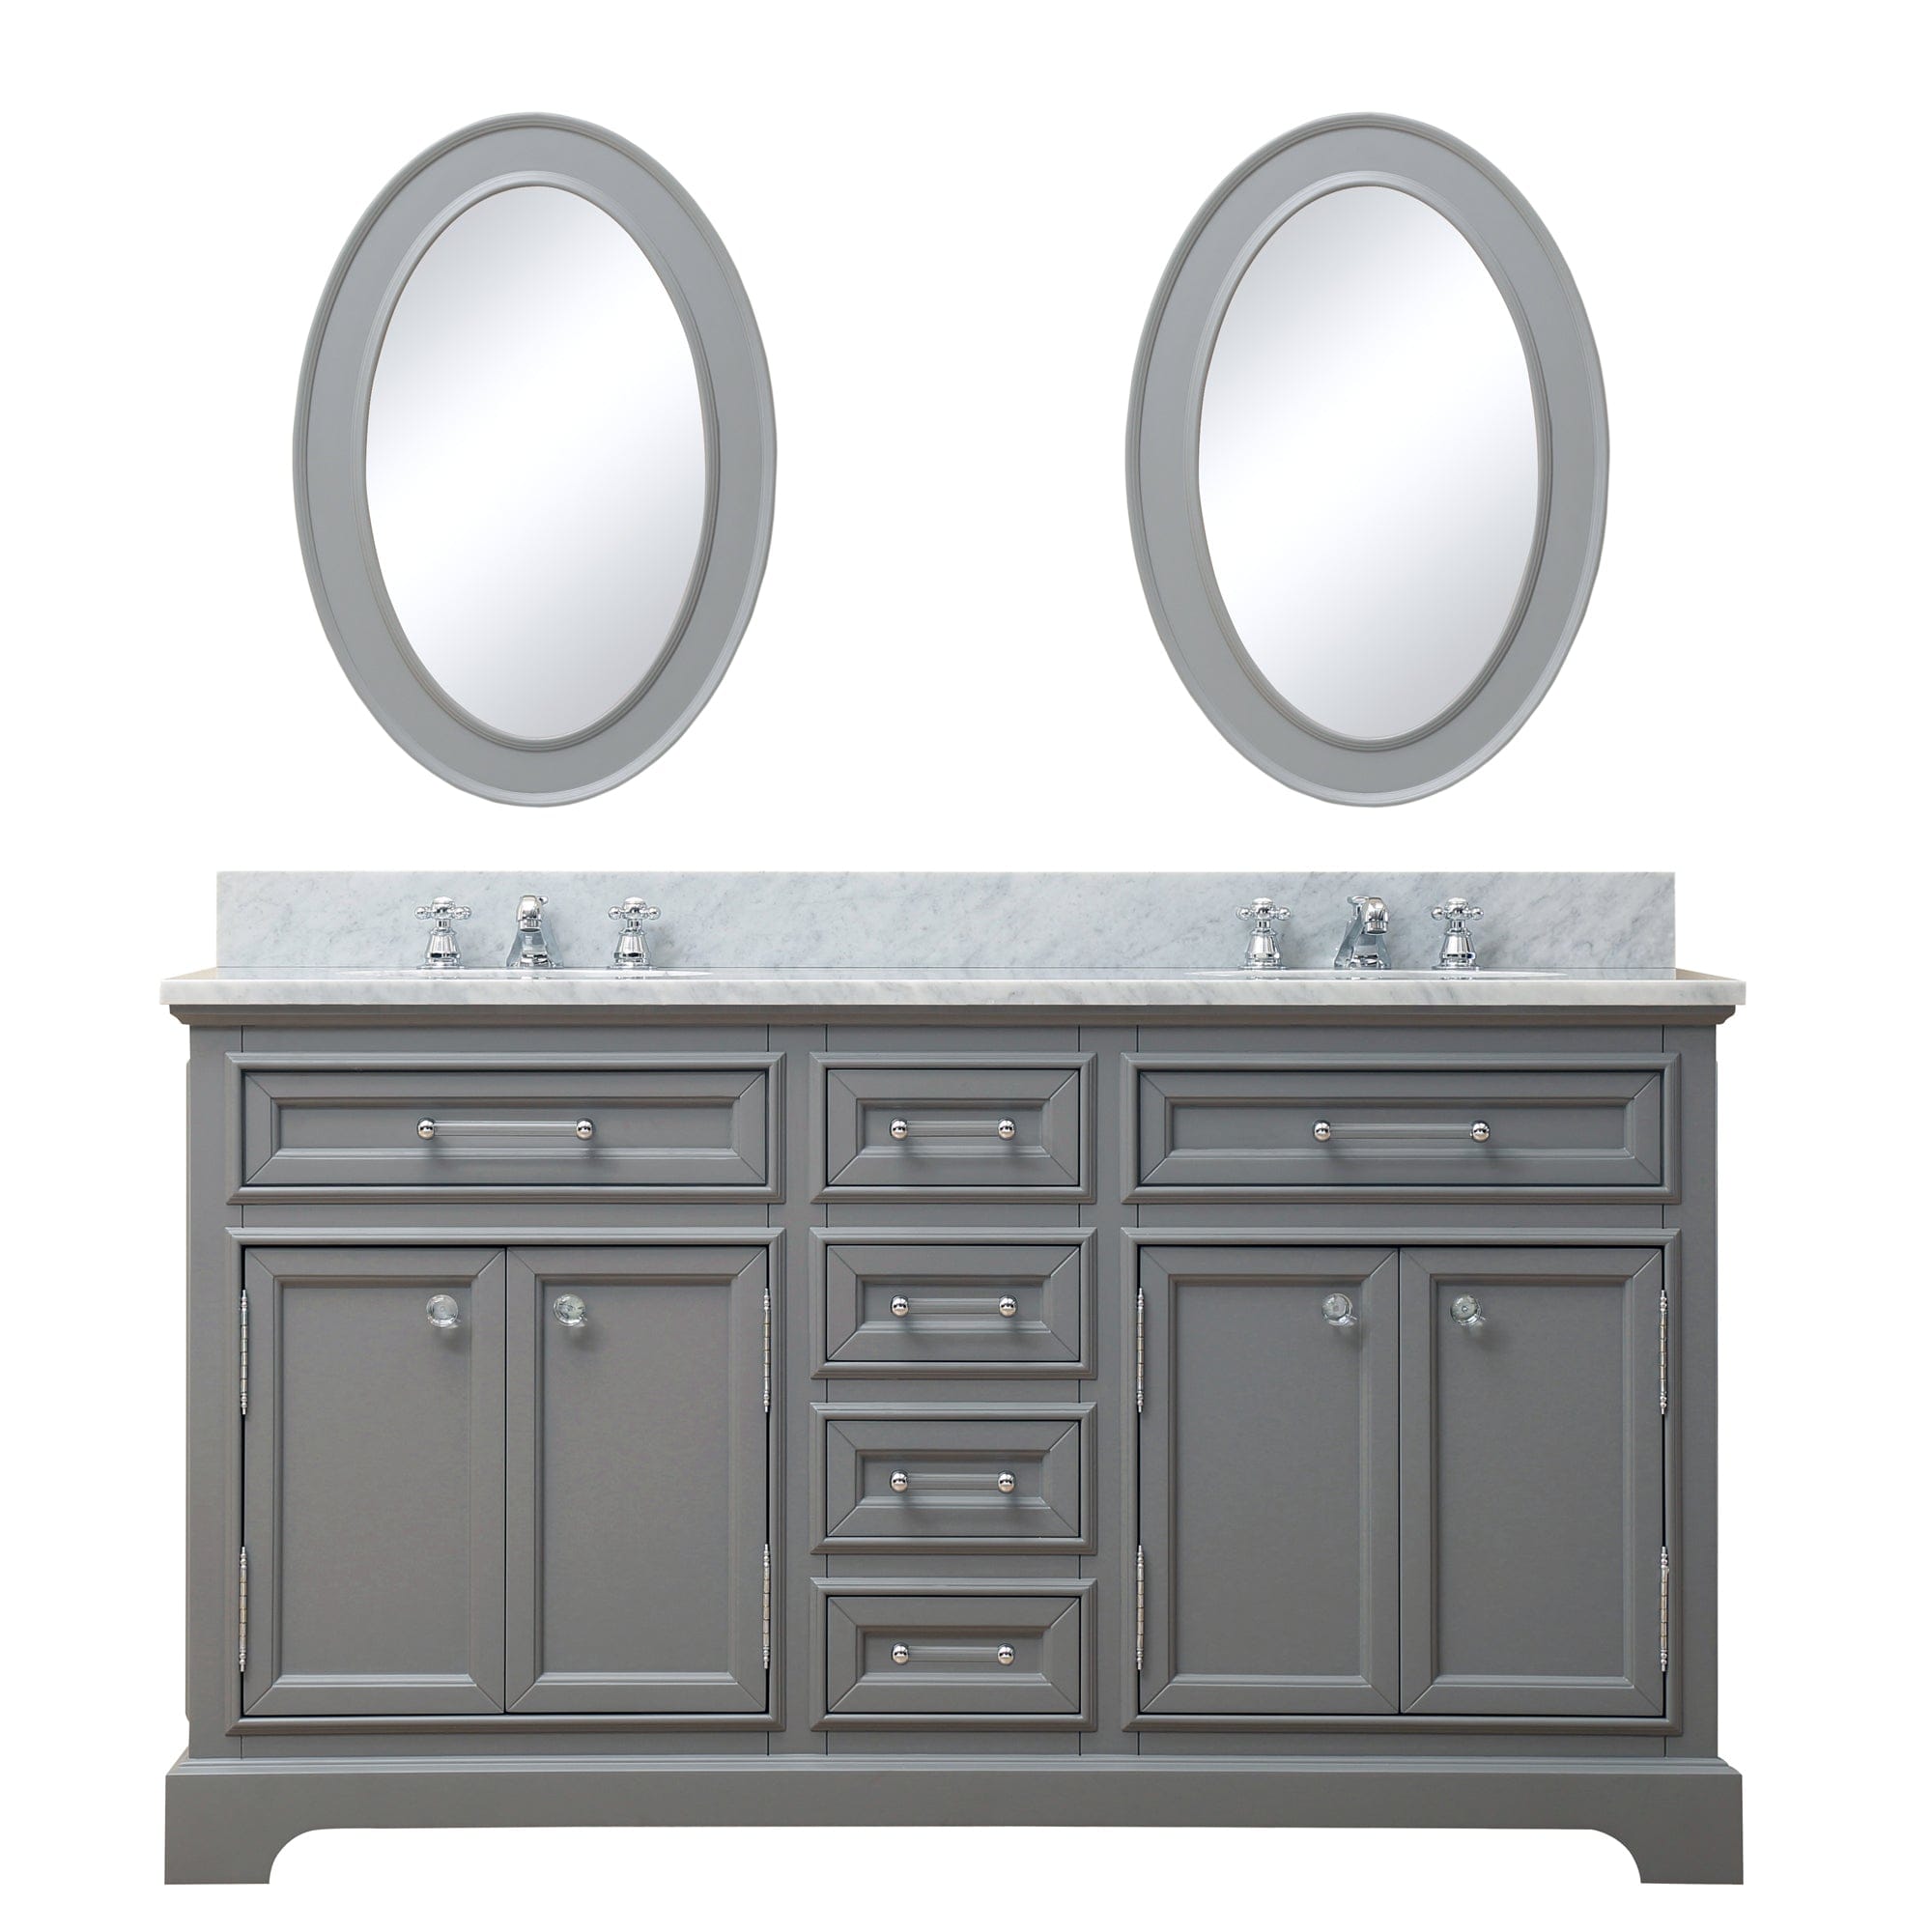 60 Inch Cashmere Grey Double Sink Bathroom Vanity With Matching Framed Mirrors From The Derby Collection - Molaix700621683087DE60CW01CG-O21000000